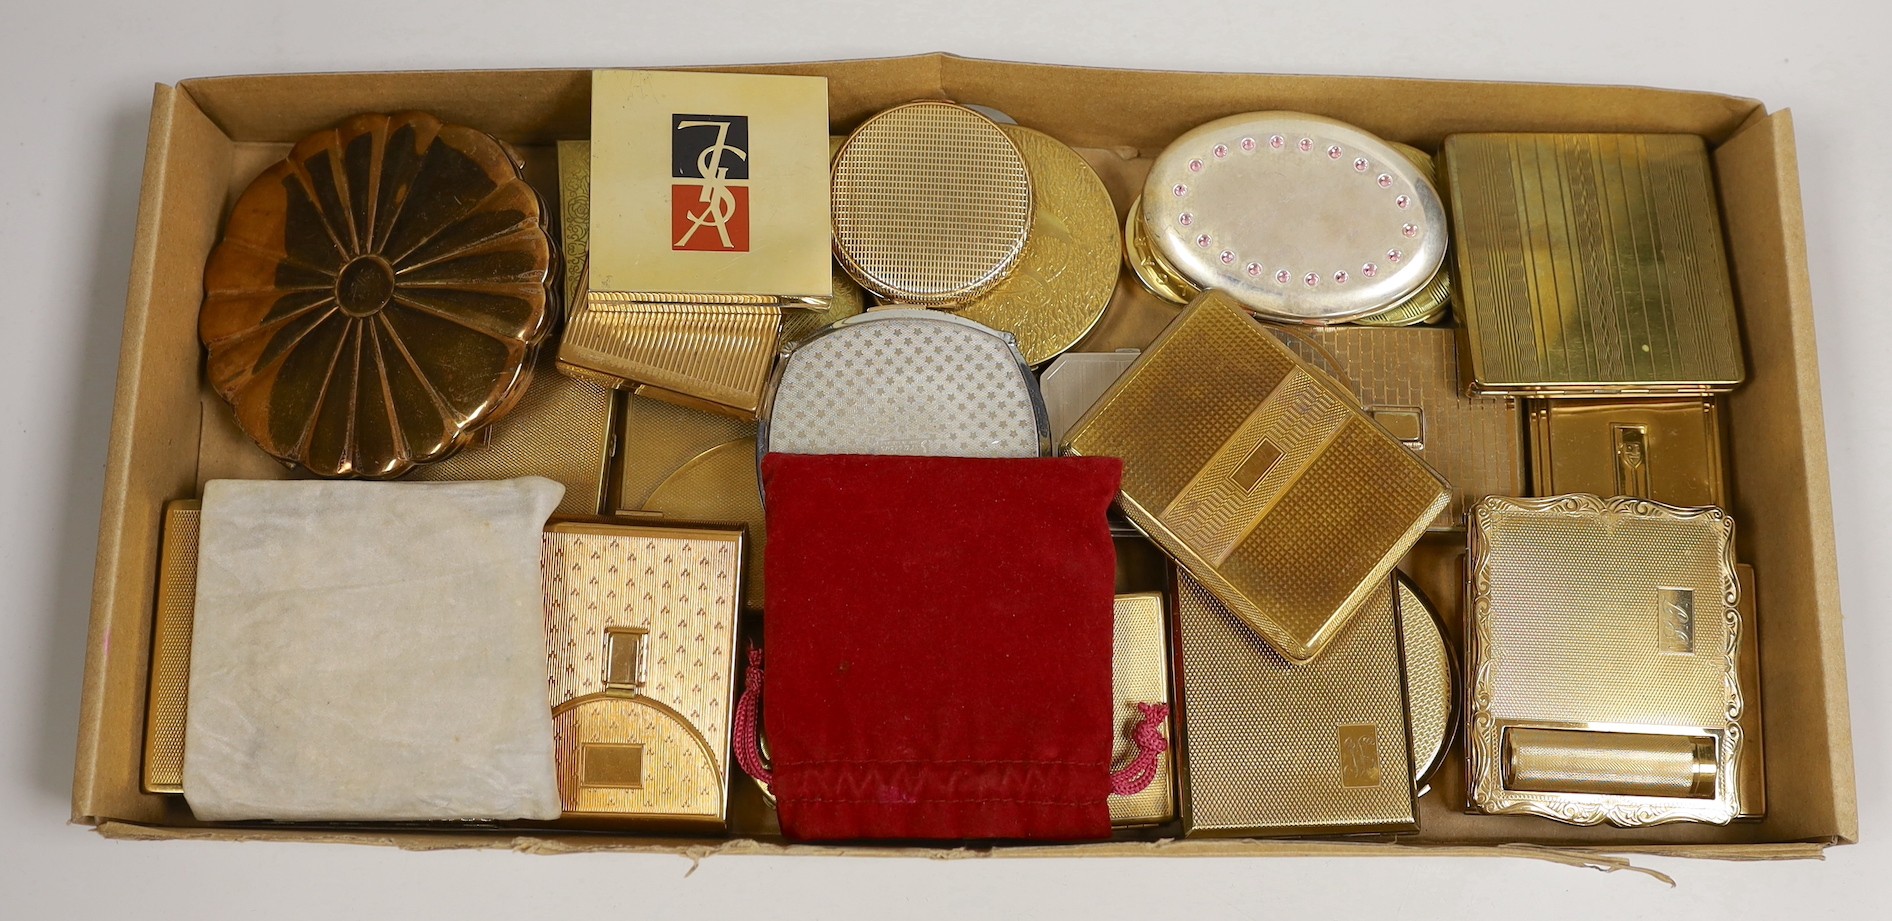 A collection of ladies compacts mostly from 1950’s and later: Coty, YSL, Swarovski, etc